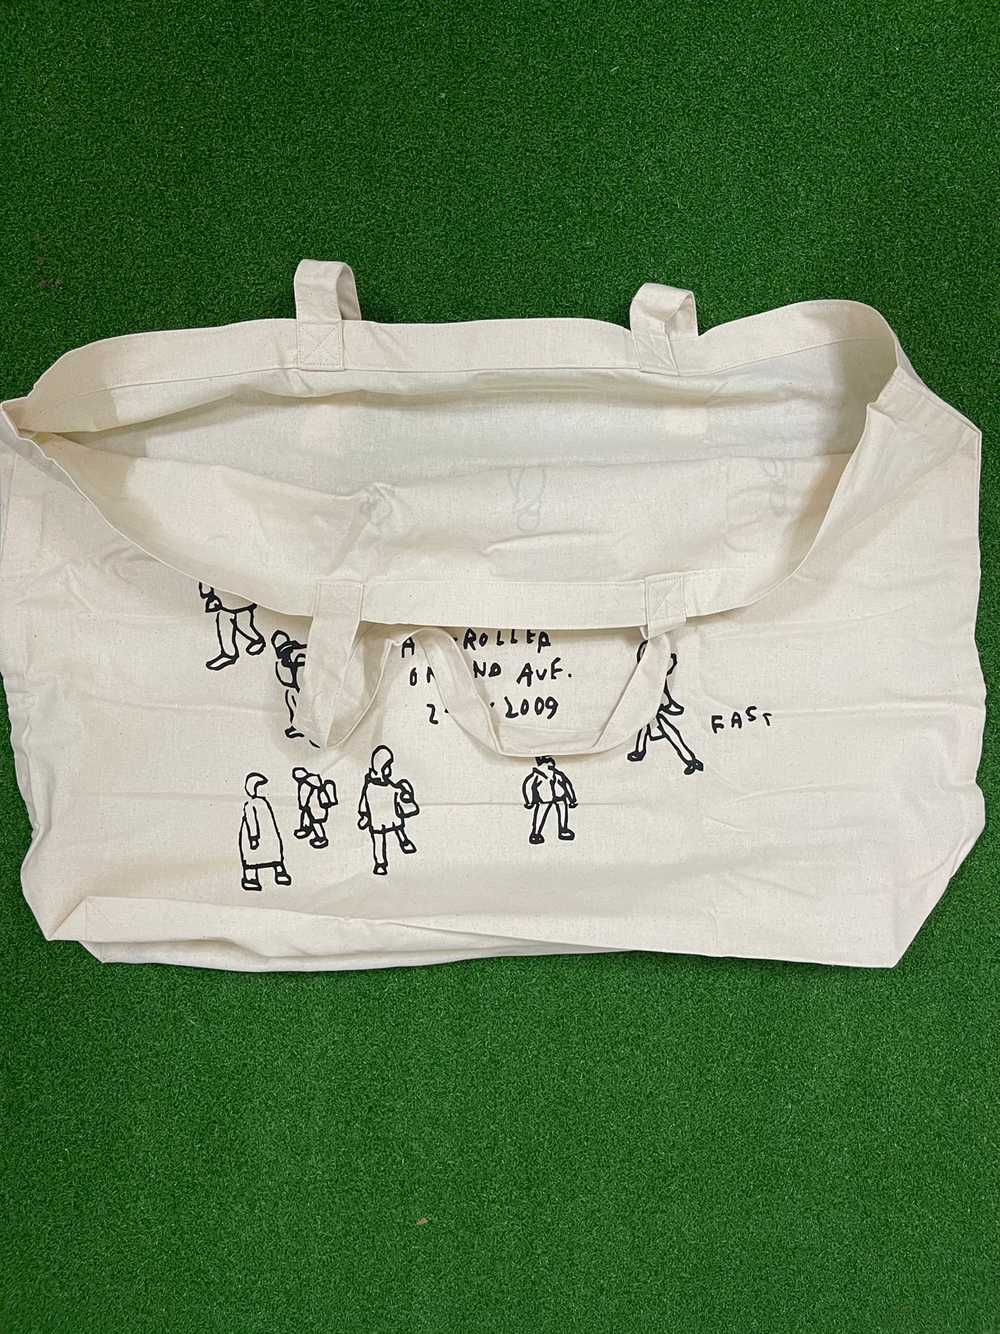 Outdoor Style Go Out! - New Jason Polan Tote Bag … - image 10